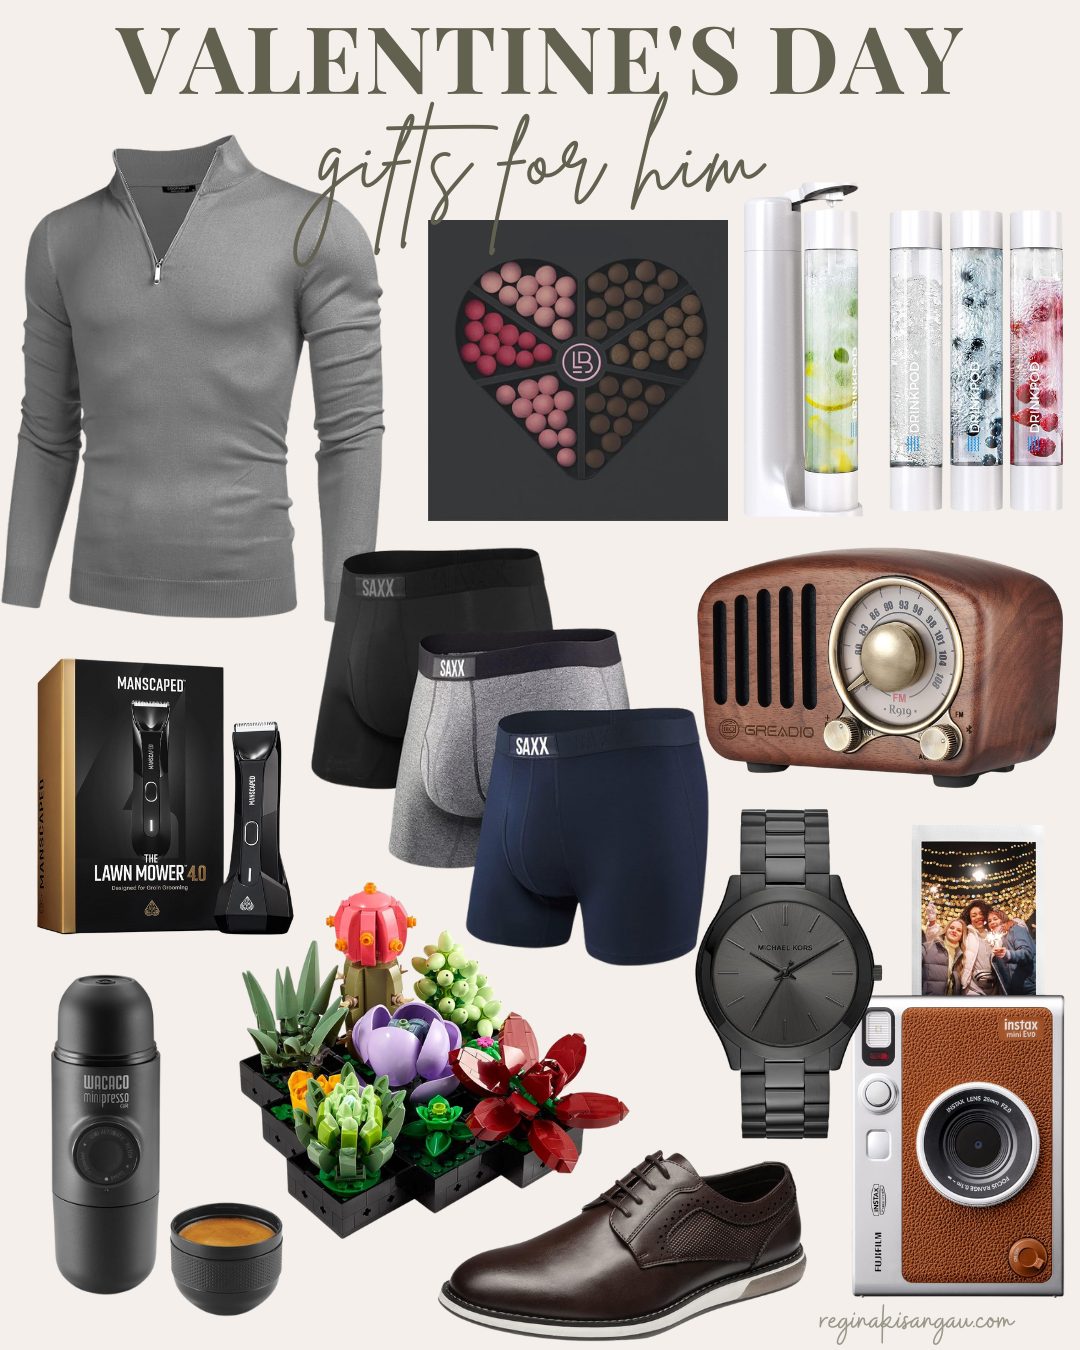 Delightful Valentine’s Day Gifts For Him